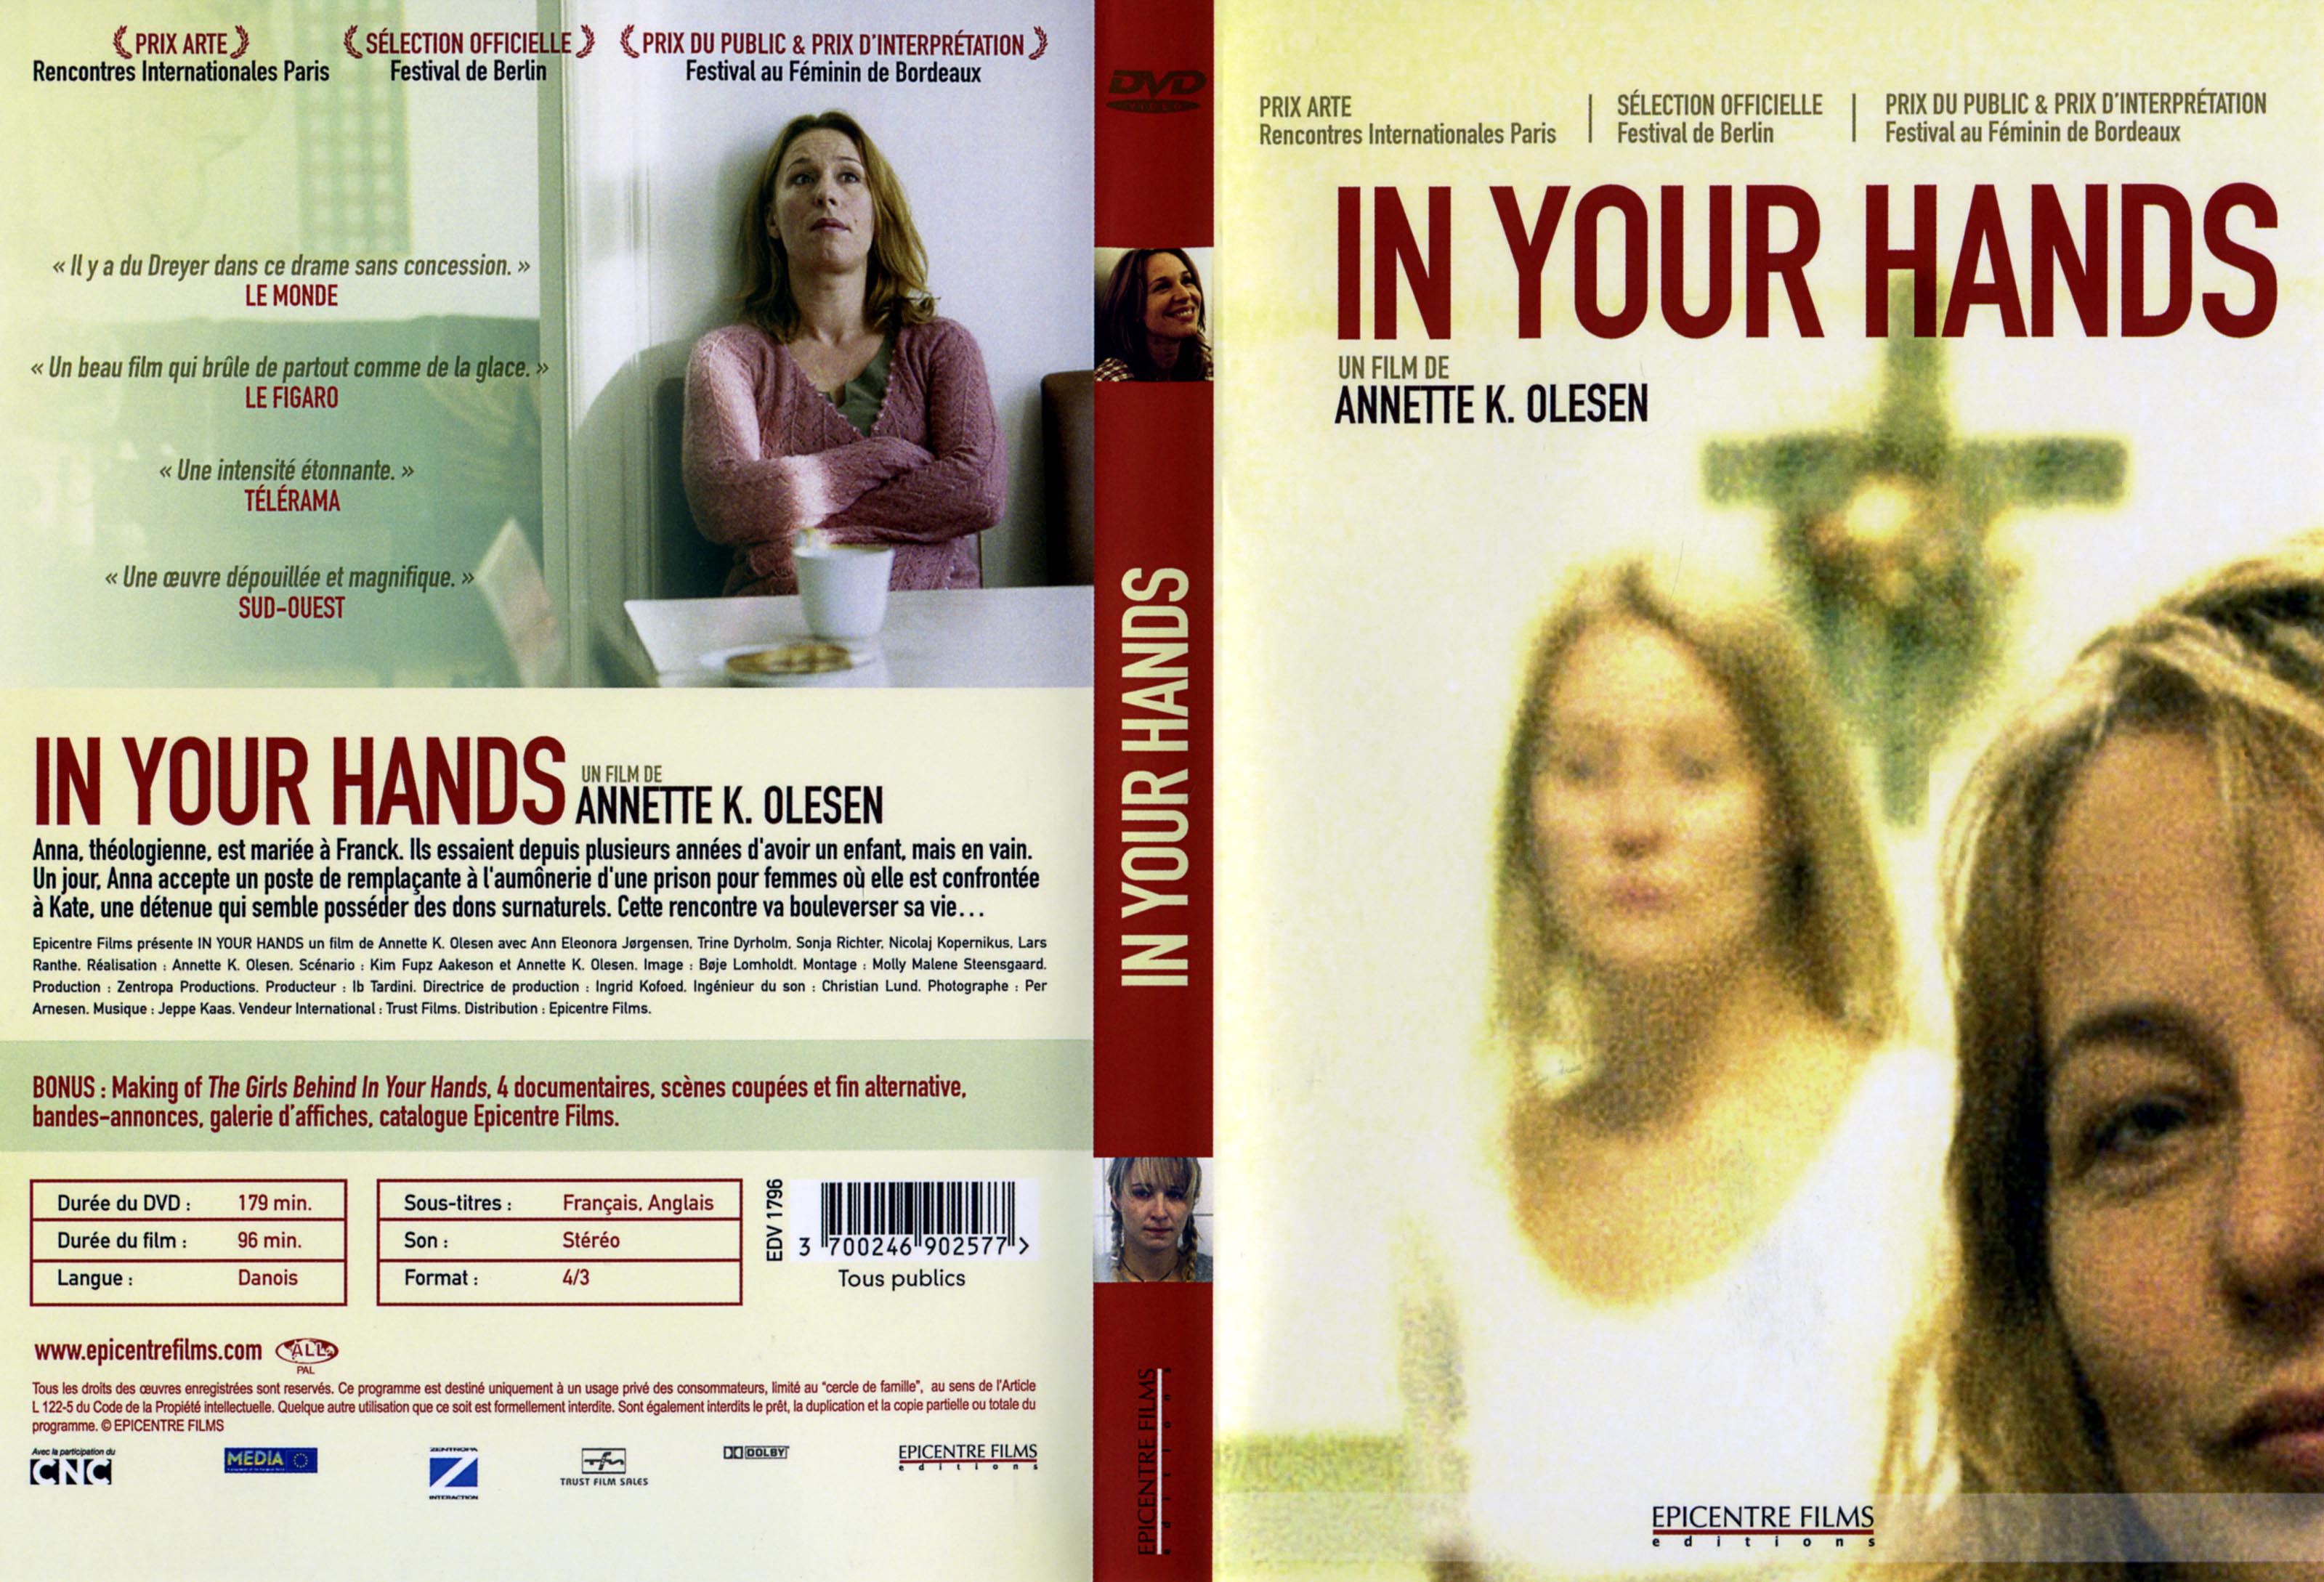 Jaquette DVD In your hands